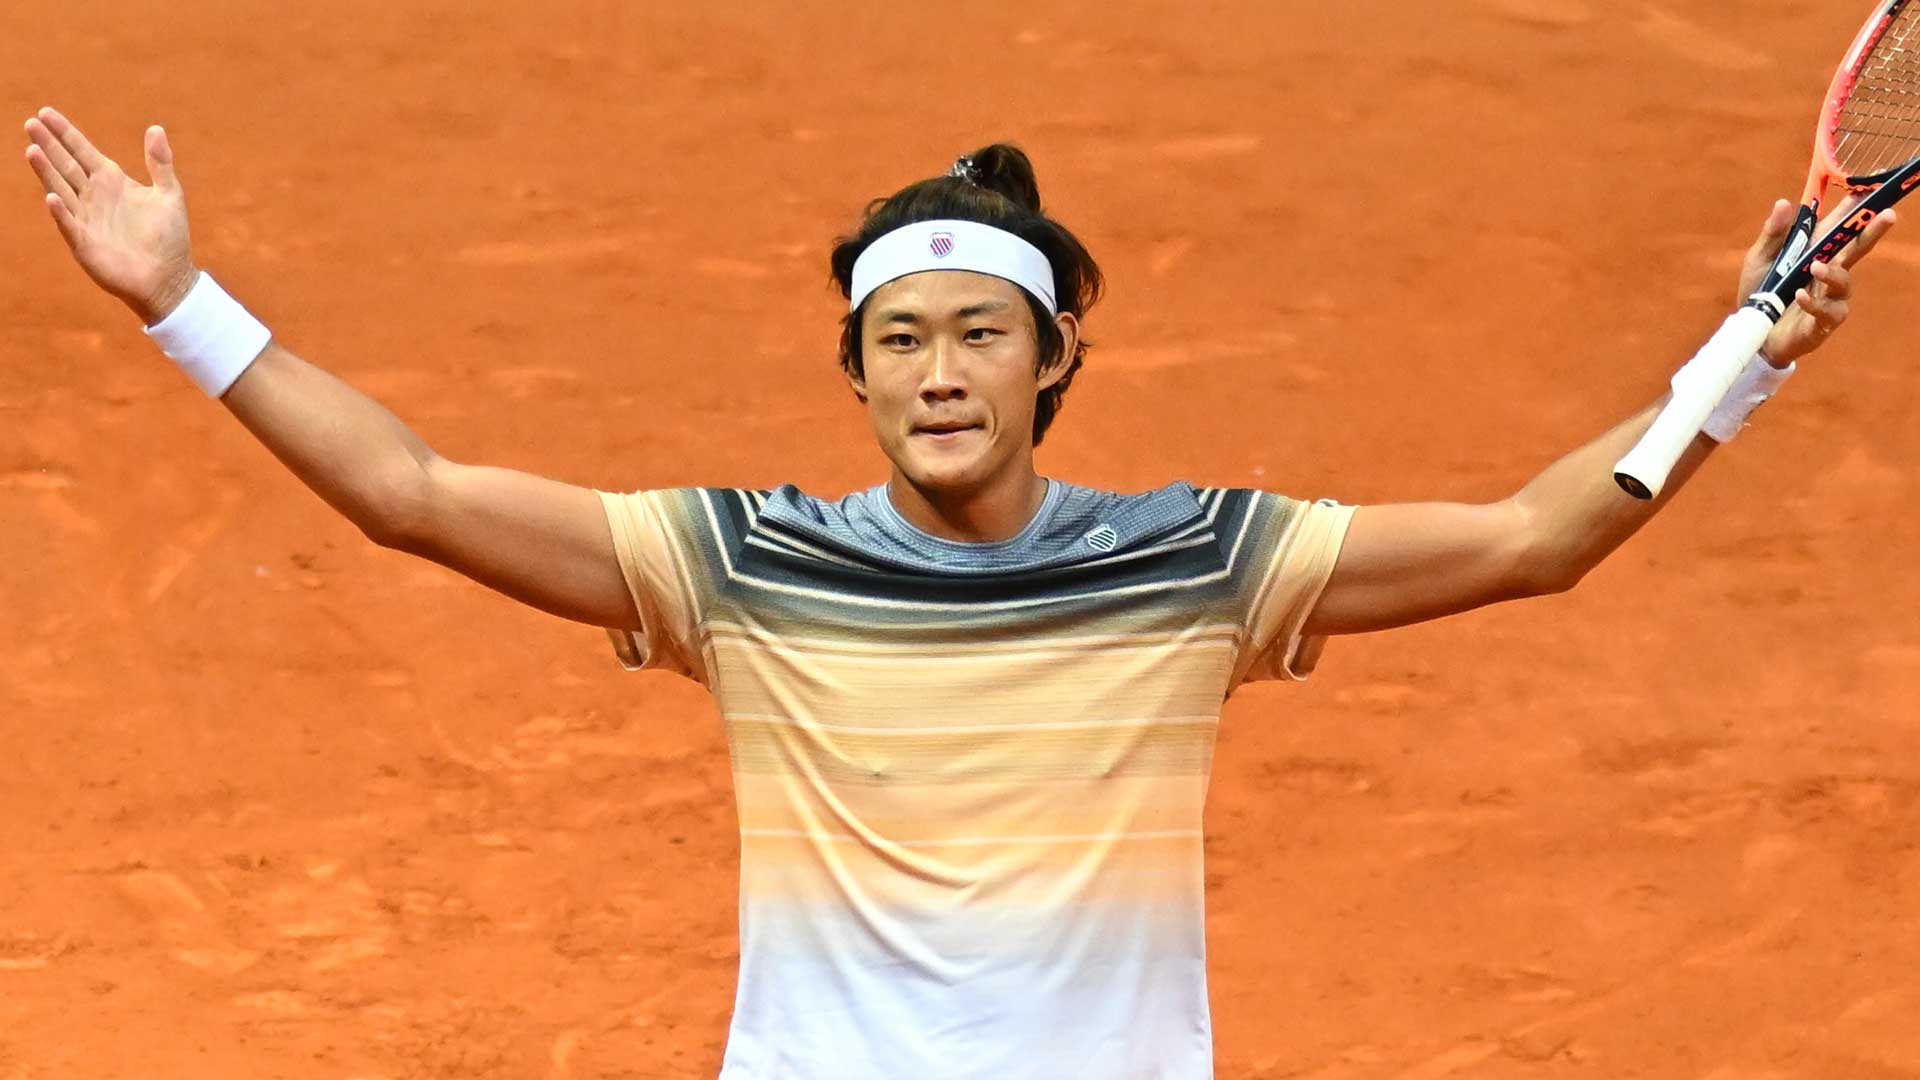 Zhang Zhizhen celebrates his third win in Madrid after extending his dream debut in the Spanish capital.